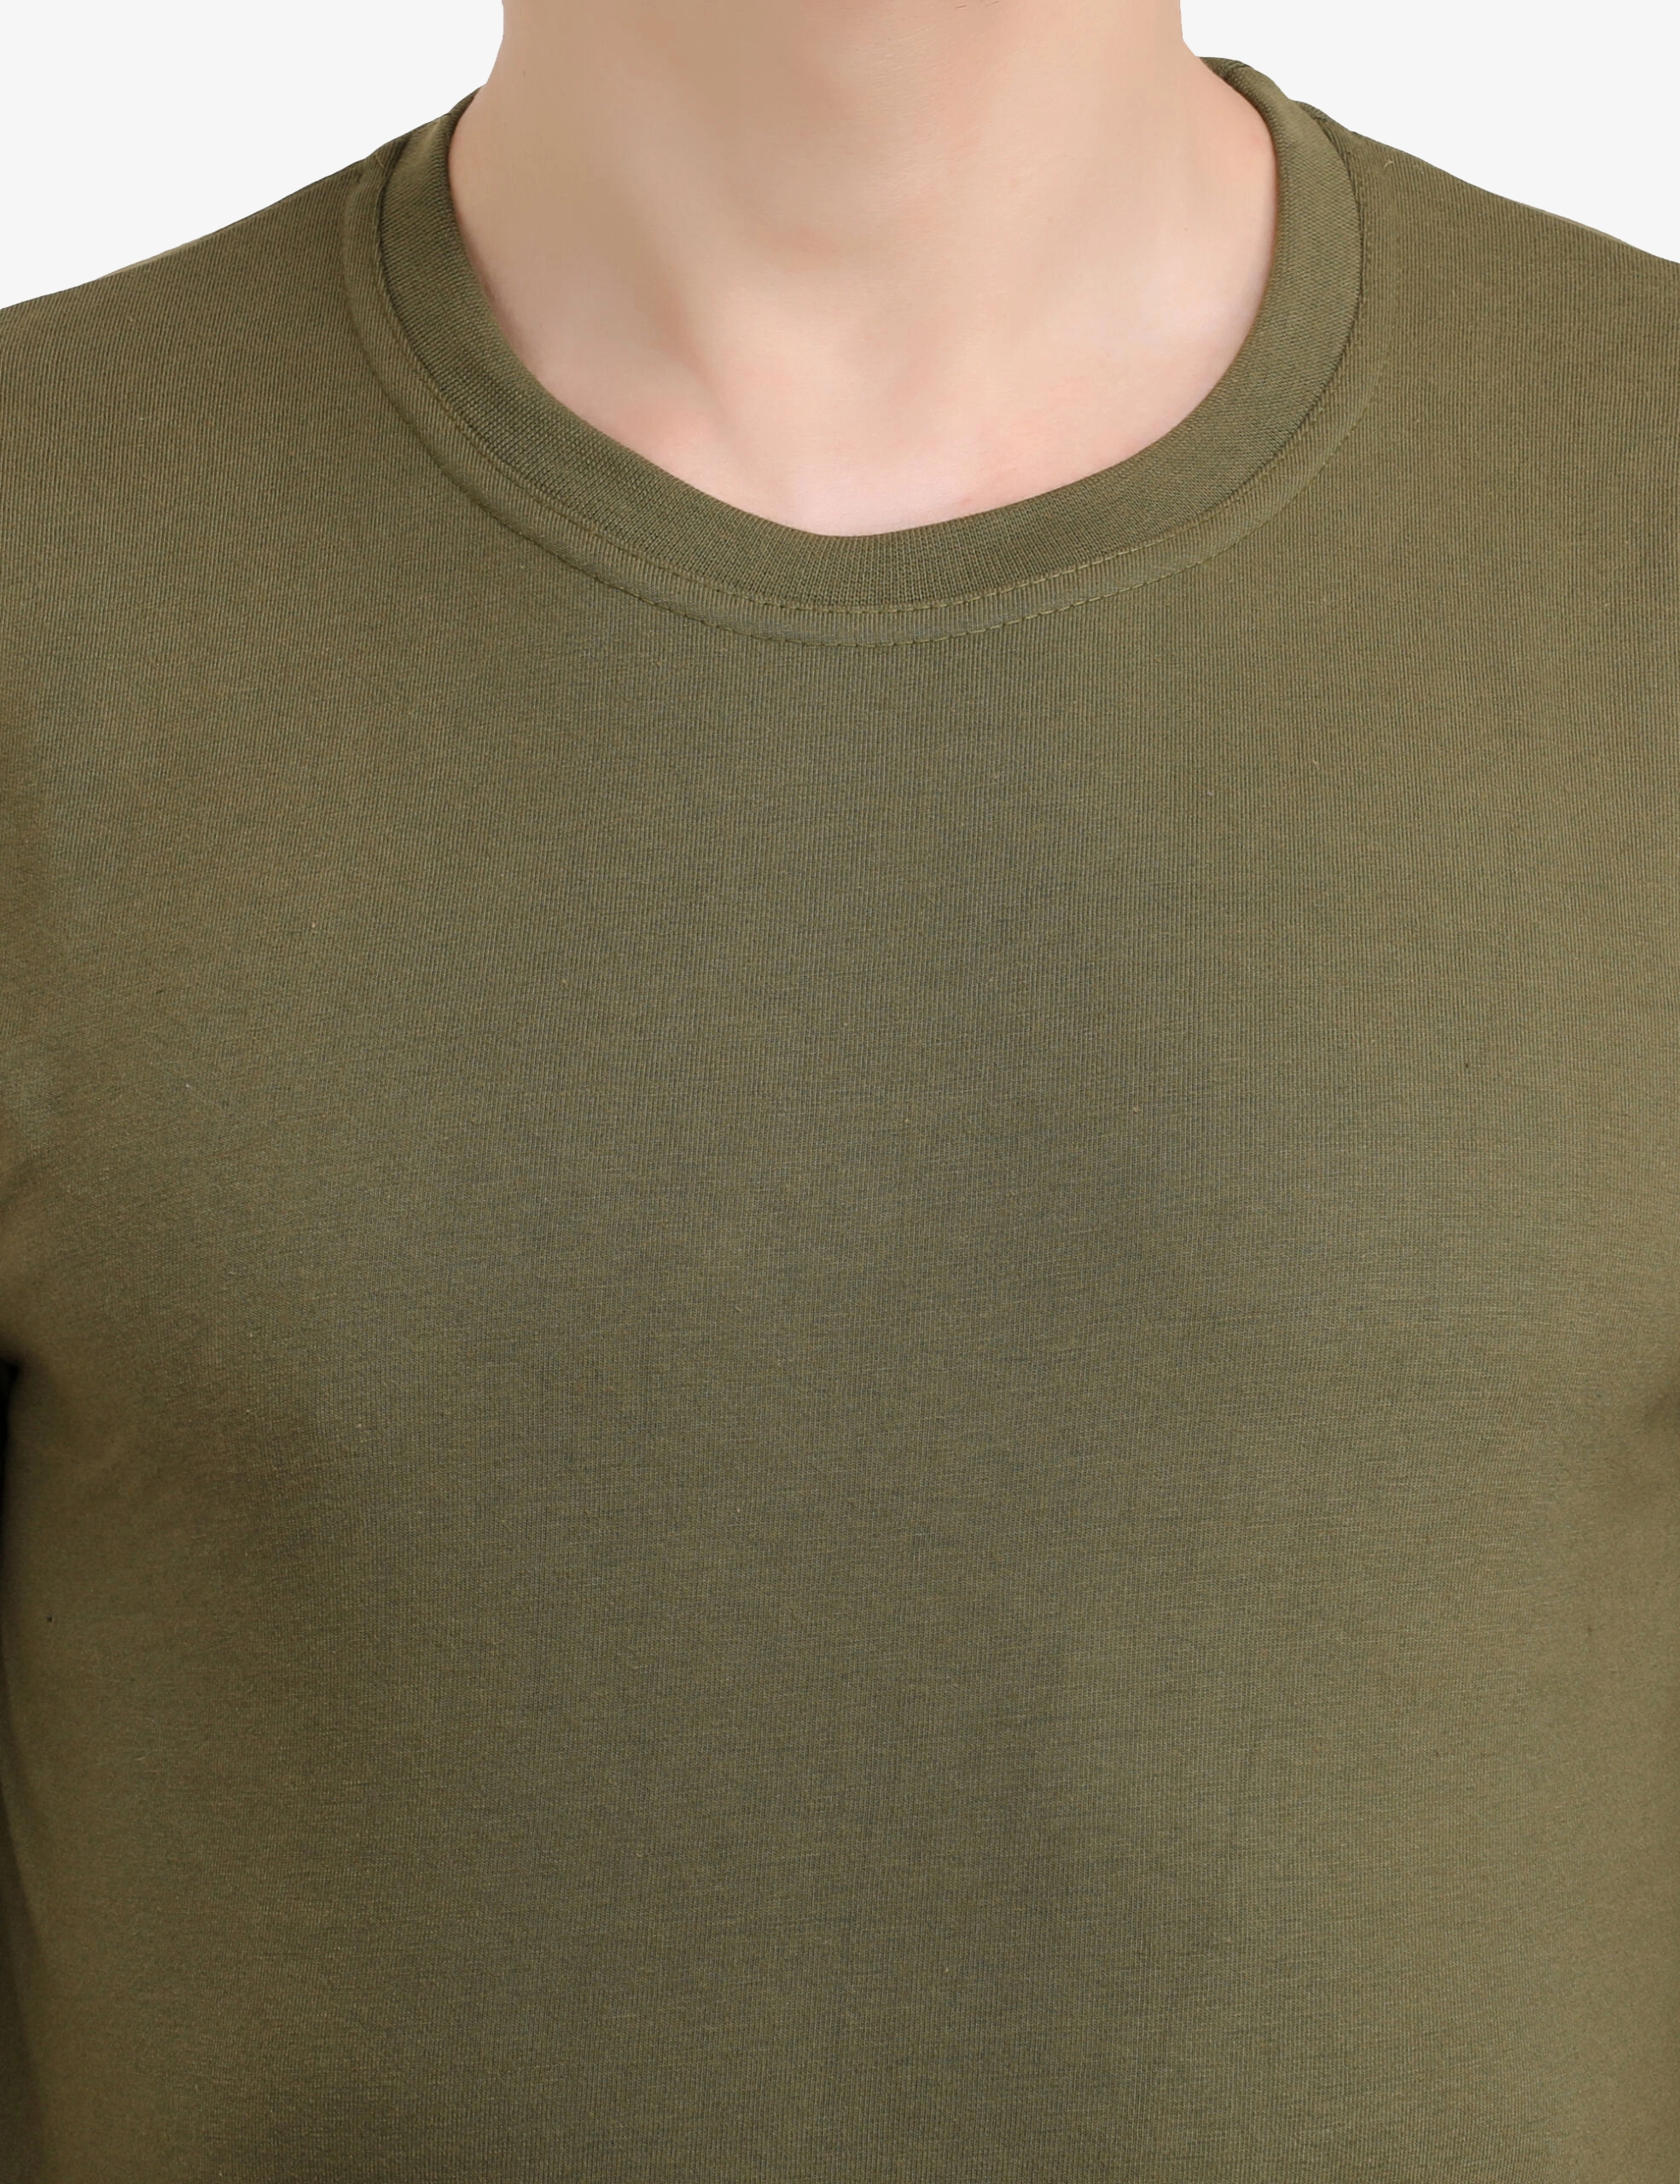 ASI Charge Olive Green T-Shirt for Men